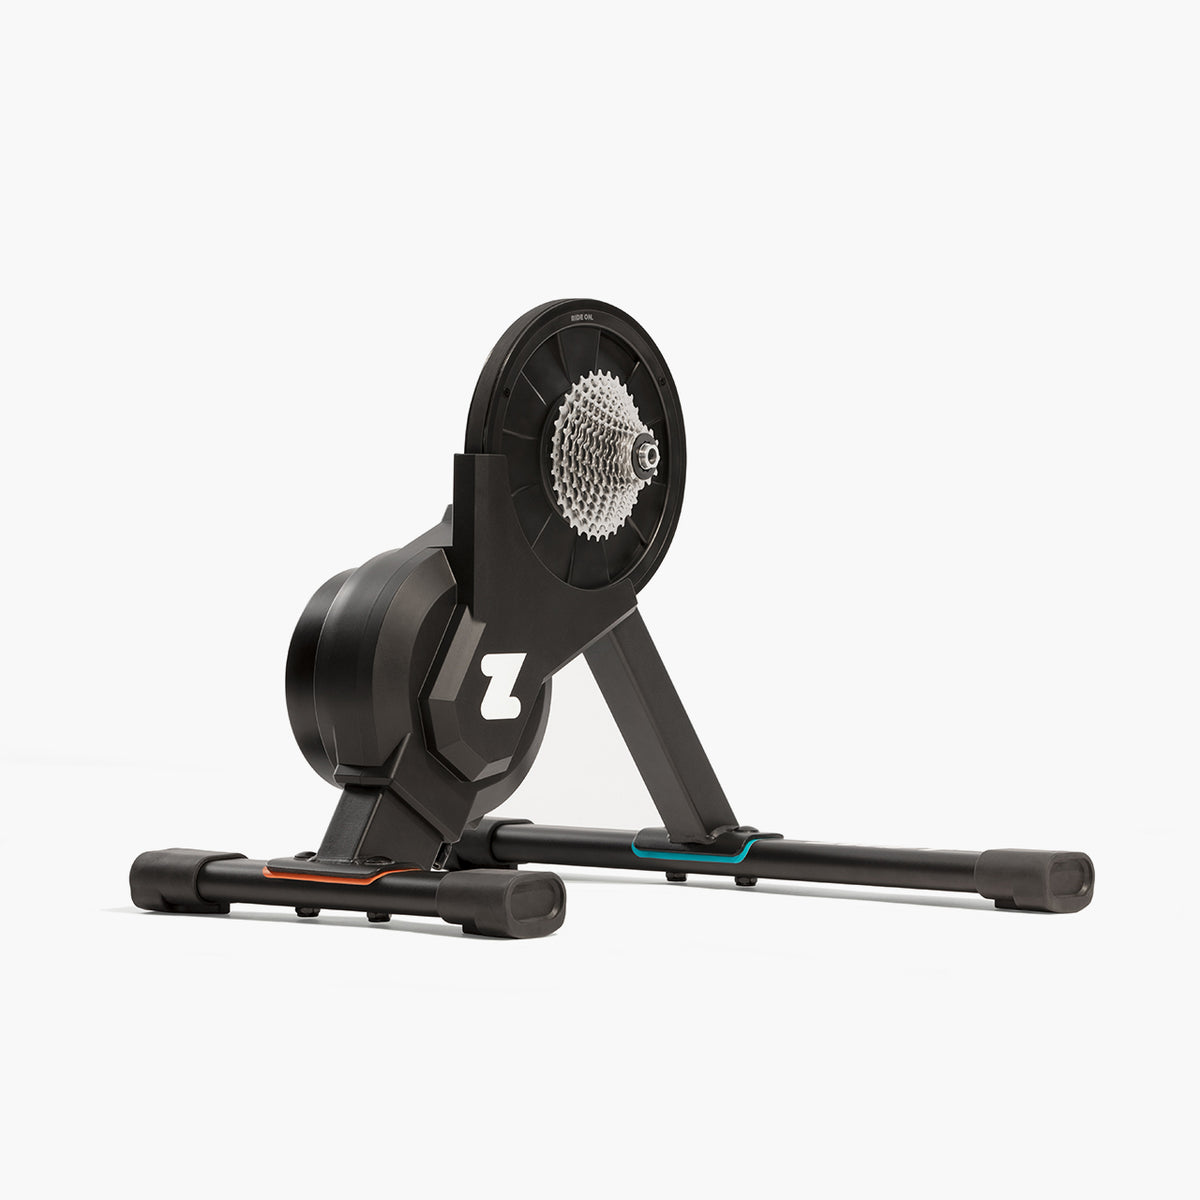 Zwift Hub Smart Turbo Trainer with 12 speed cassette